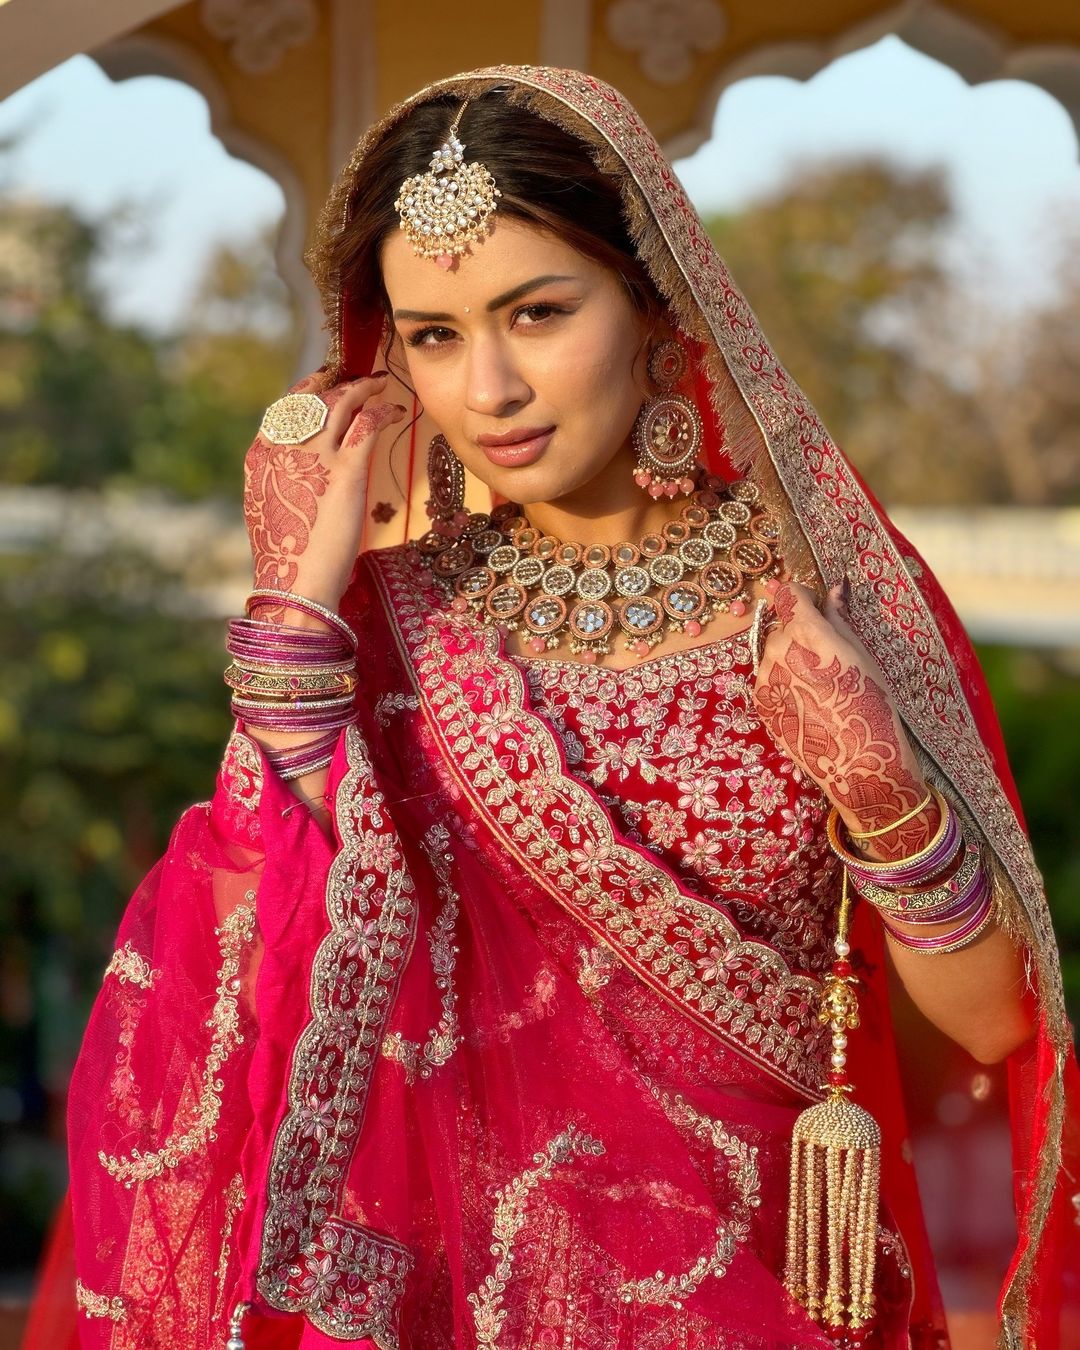 In Pics: Avneet Kaur's Fashion Quotient is Off The Charts With This Gorgeous Lehenga